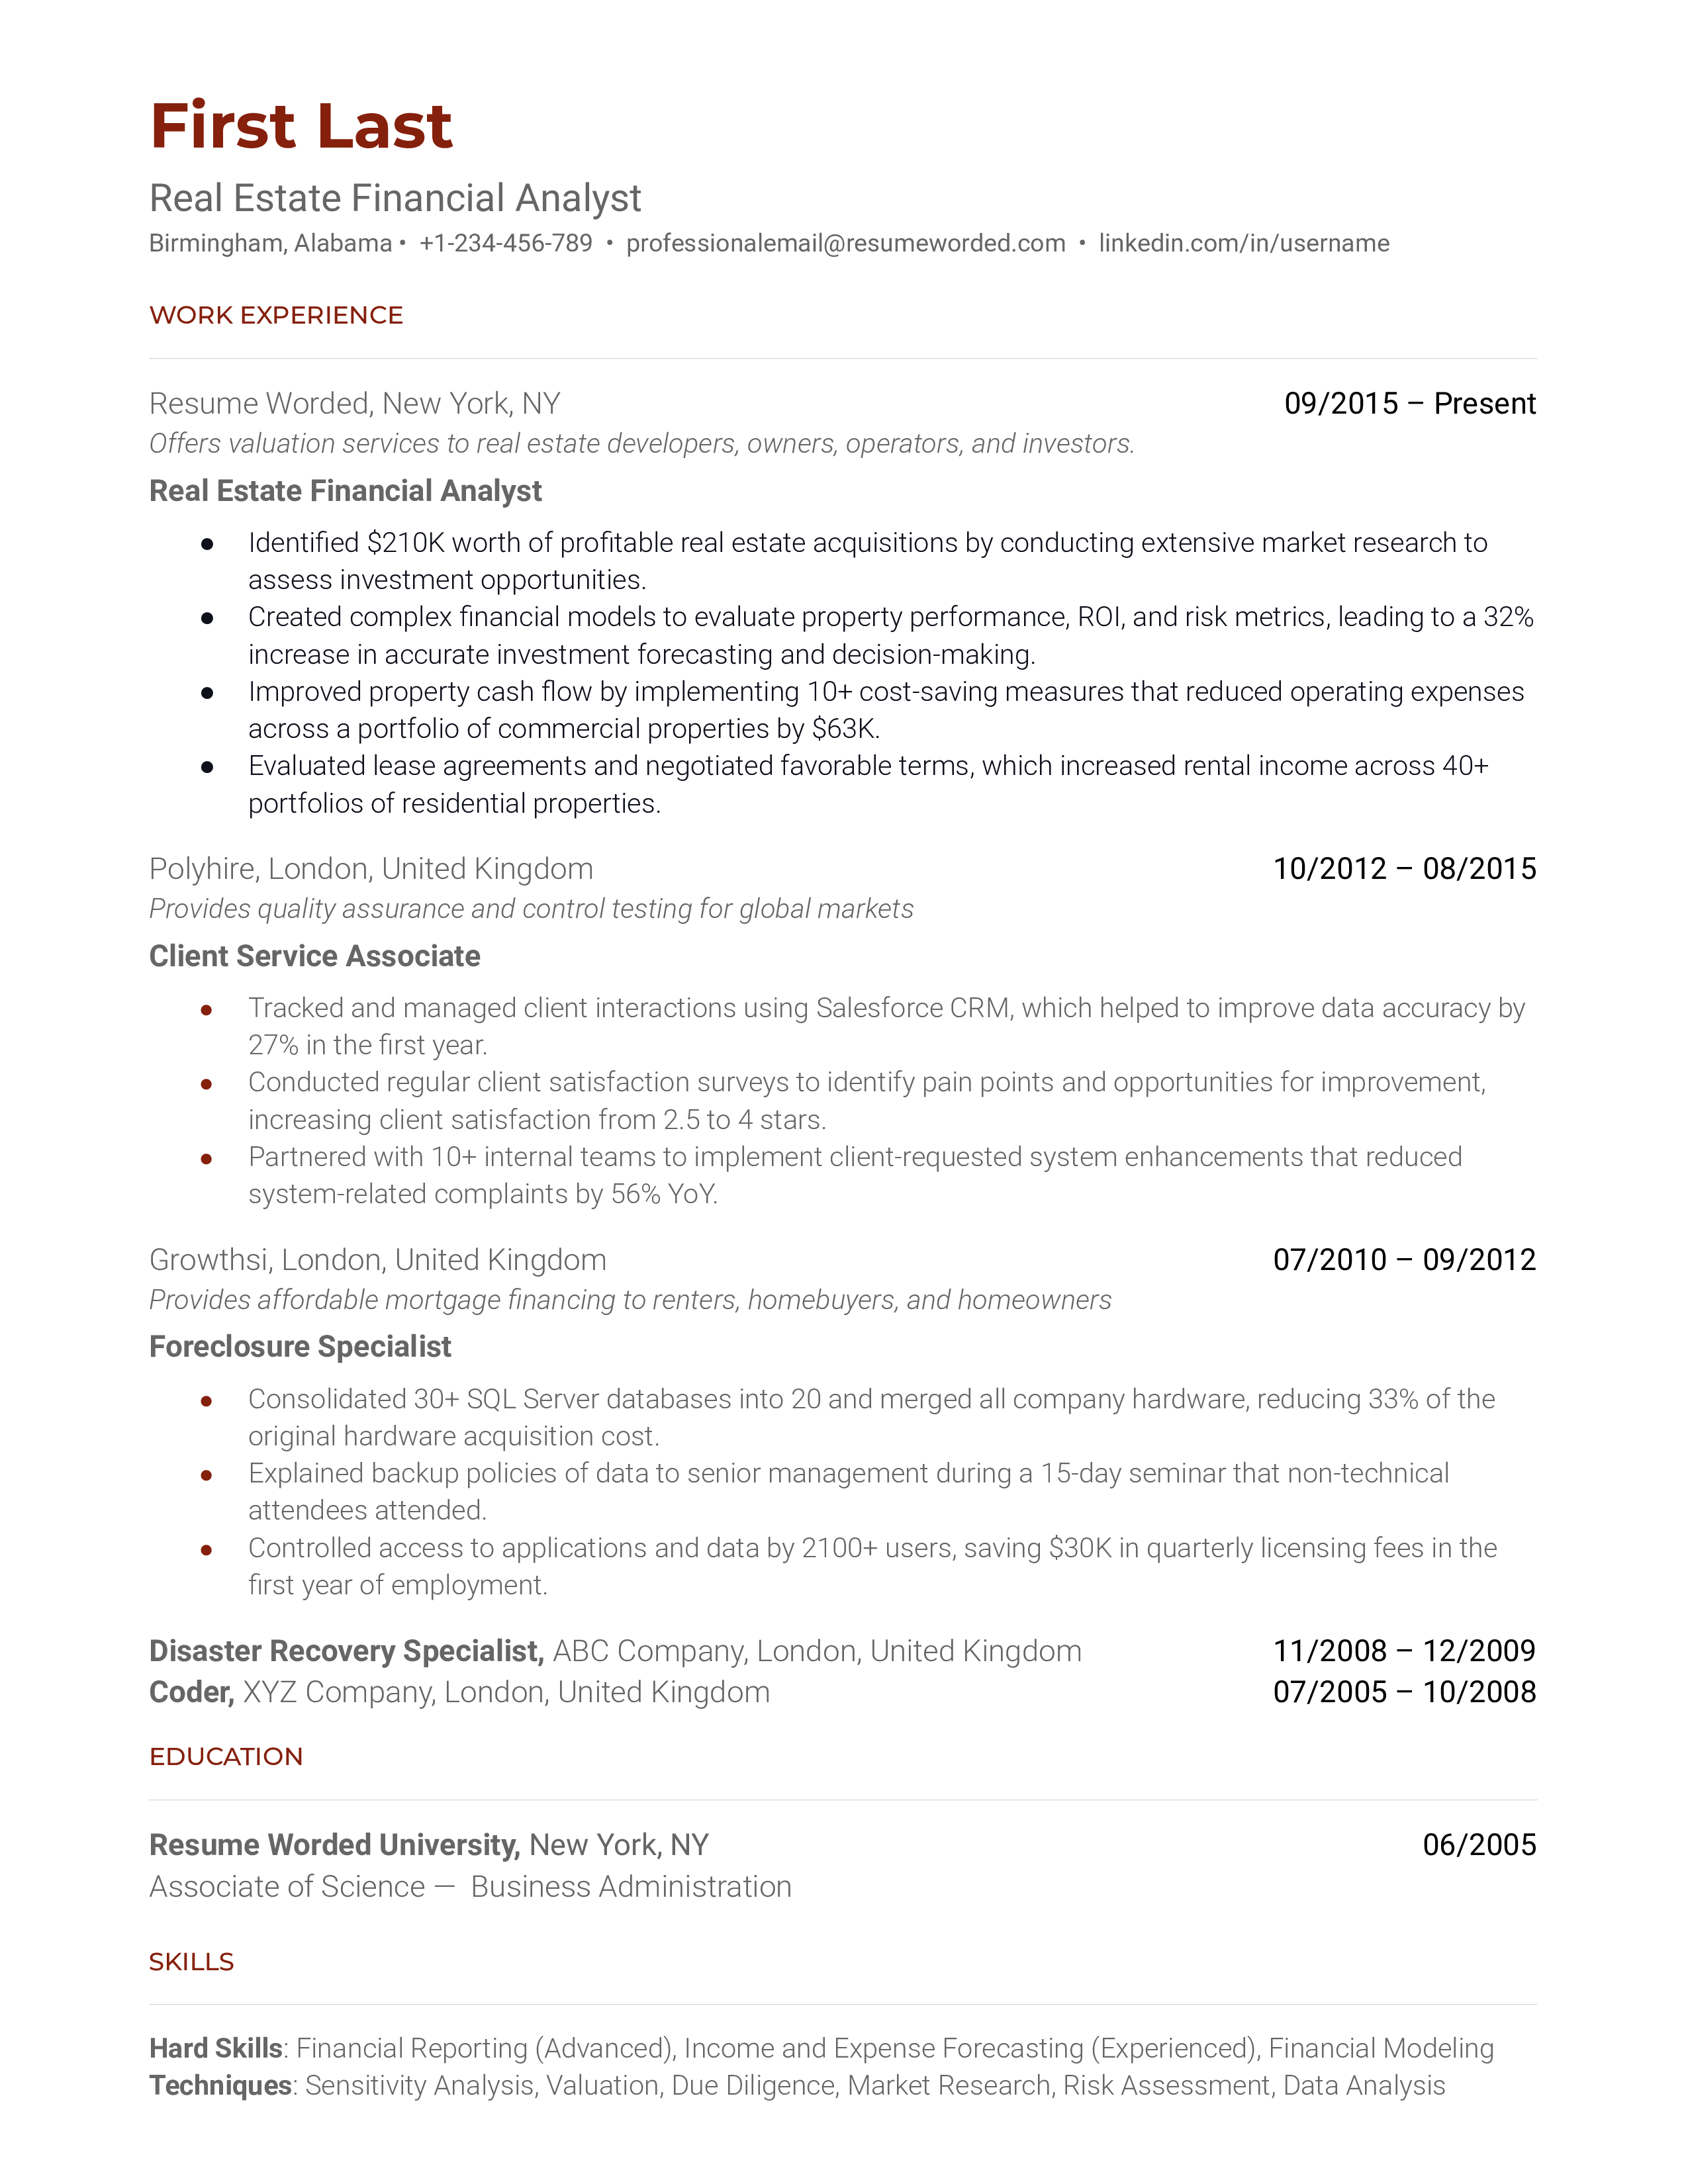 Detailed CV of a Real Estate Financial Analyst with focus on software skills and market knowledge.